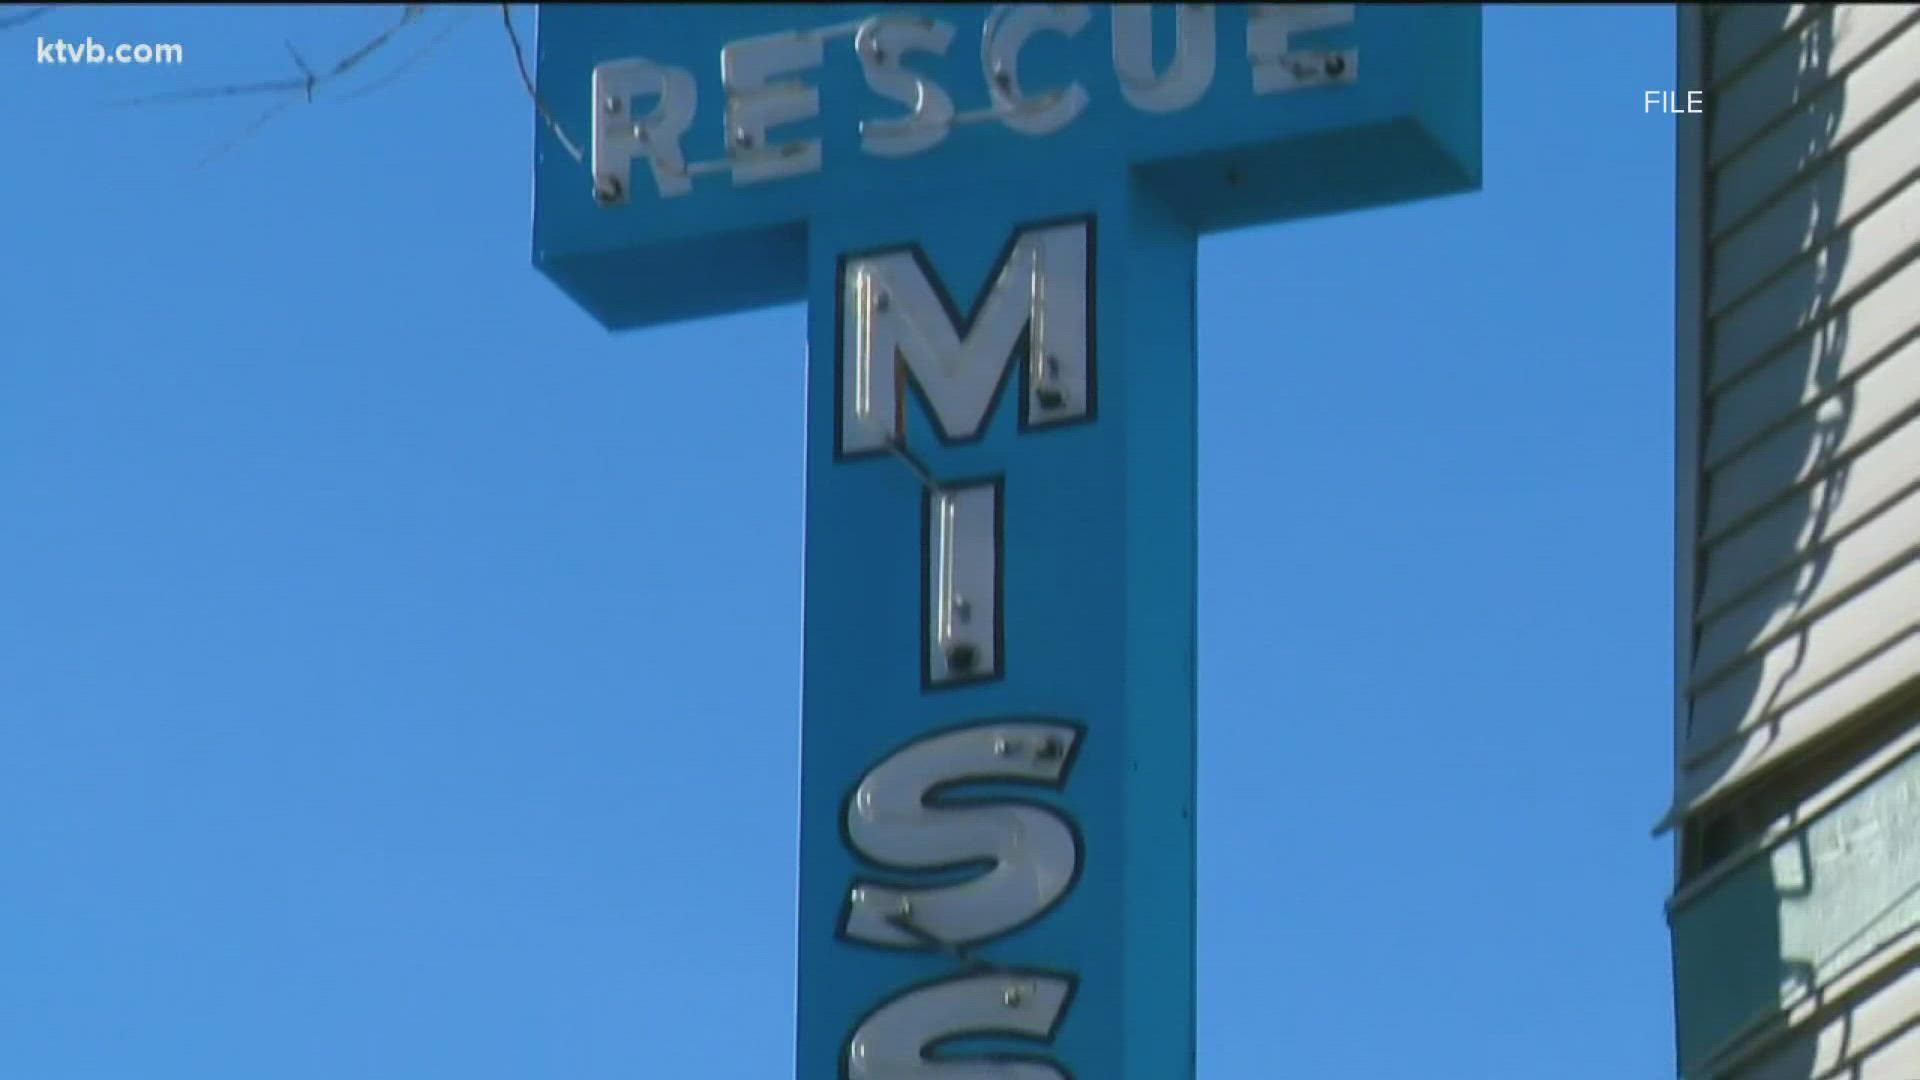 Boise Rescue Mission facilities in Nampa and Boise help men get out of homelessness and reconnect with their families, "and sometimes it starts with a hot meal."